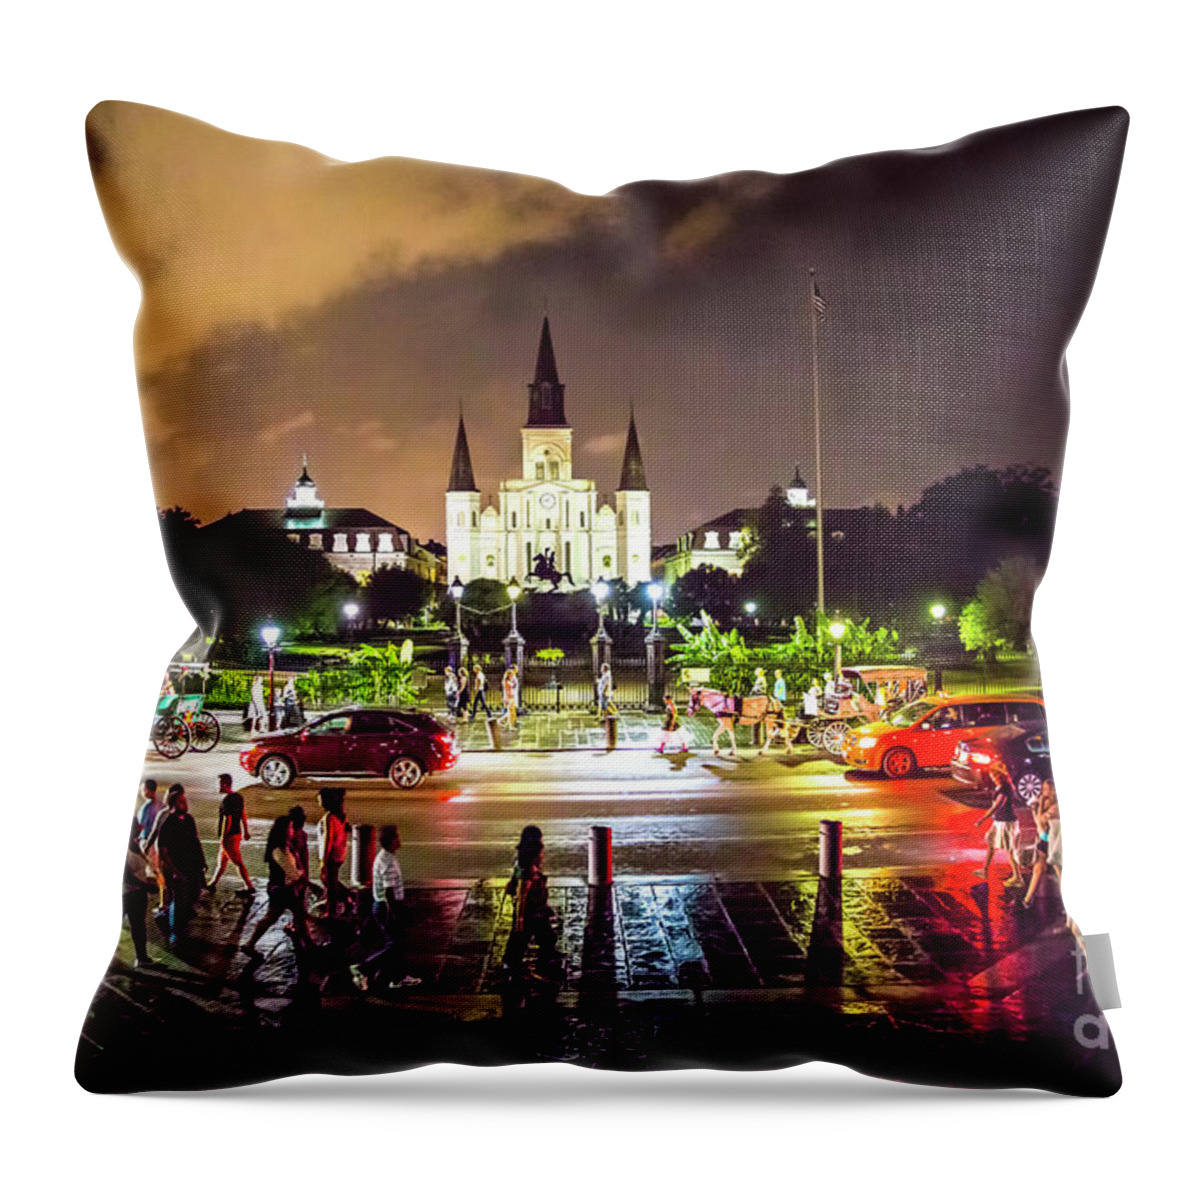 A Night In New Orleans Throw Pillow featuring the photograph A Night In New Orleans by Felix Lai